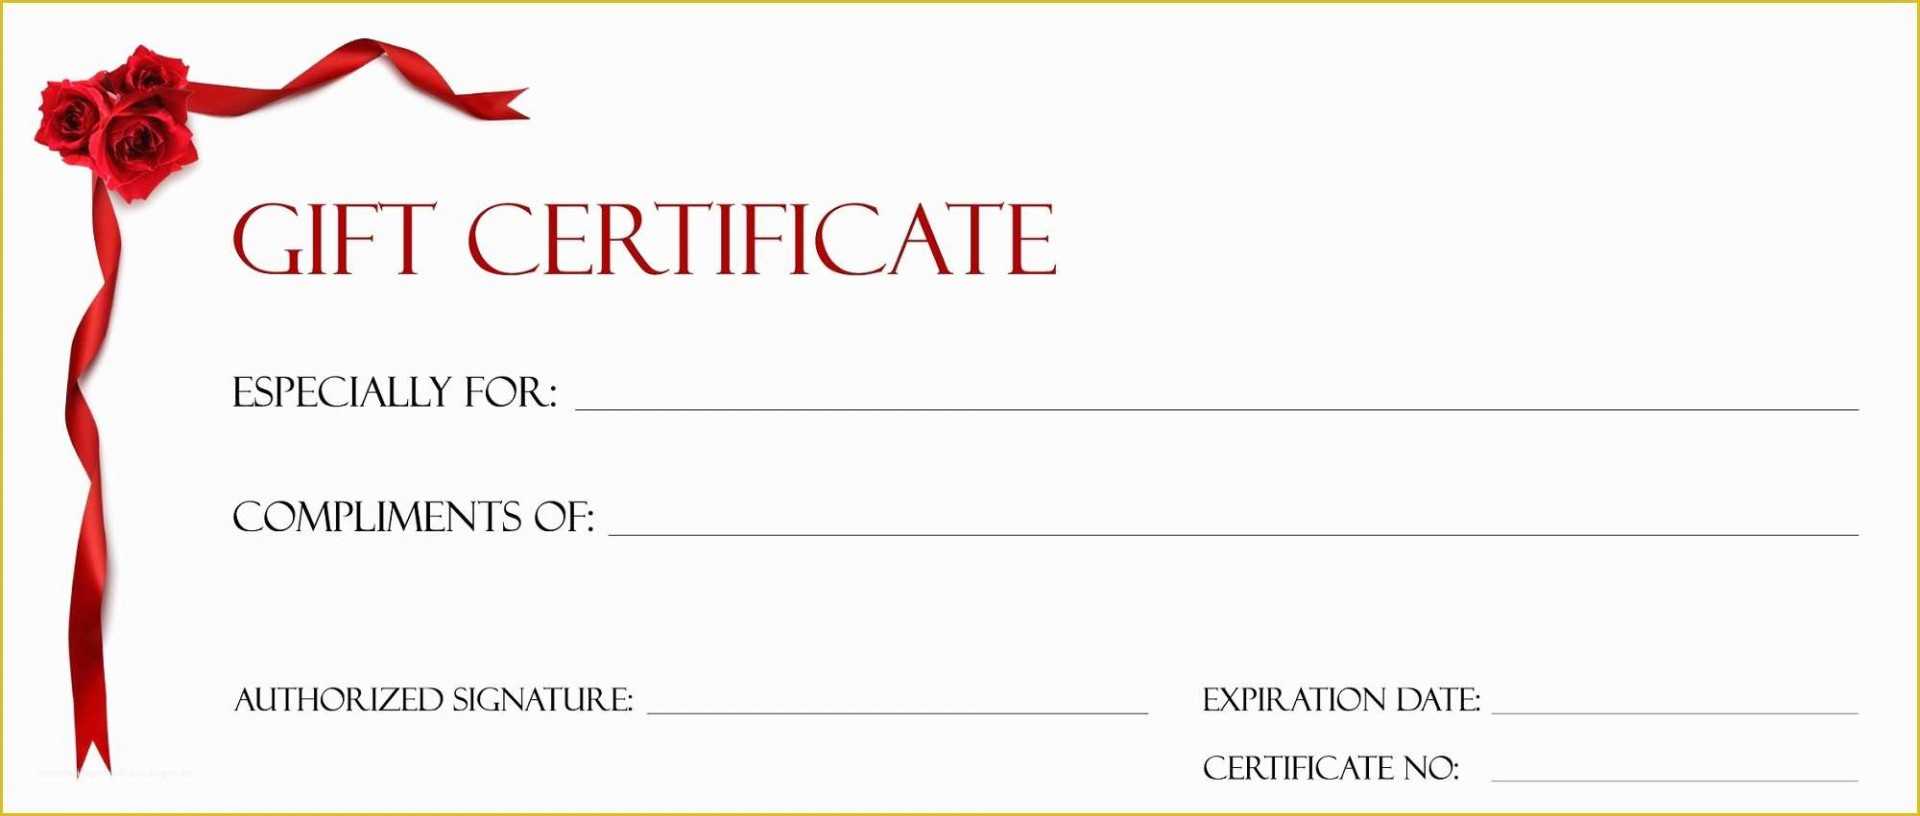 037 Free Download Gift Certificate Template Word Of Voucher With Microsoft Gift Certificate Template Free Word